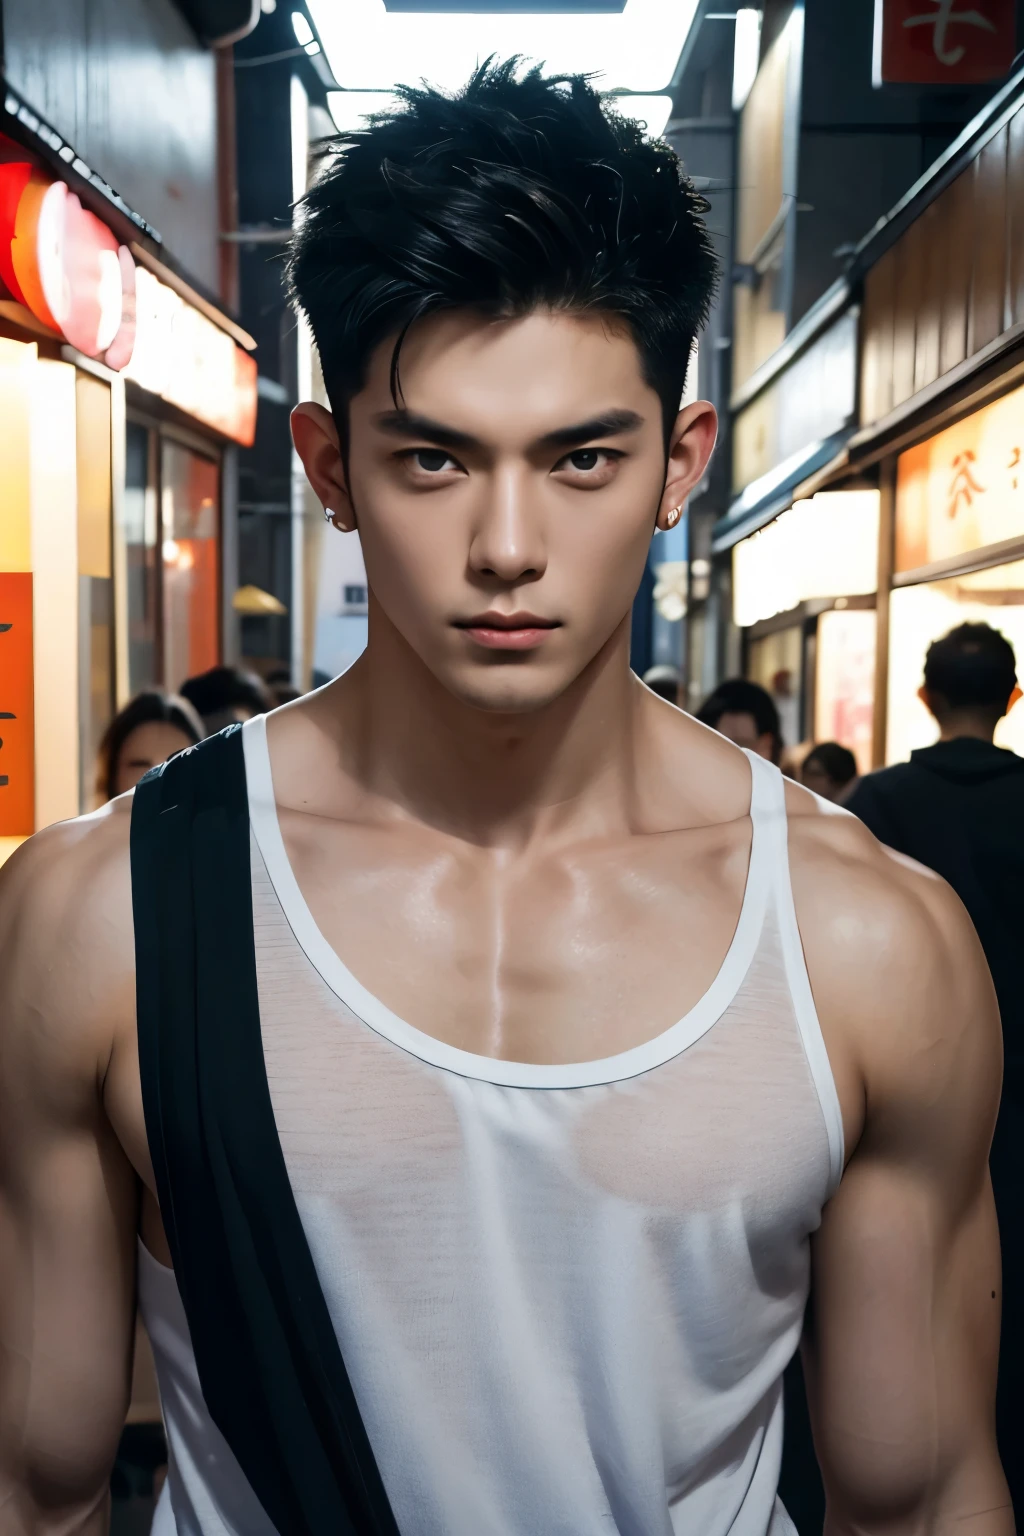 Japanese male male model, big muscles, handsome, cool, smoothly combed hair, pierced ears, wearing a loose tank top, holding a lollipop, portraiture, modeling, dynamic pose, Japanese street, late at night, store lights trade, full half body shot 